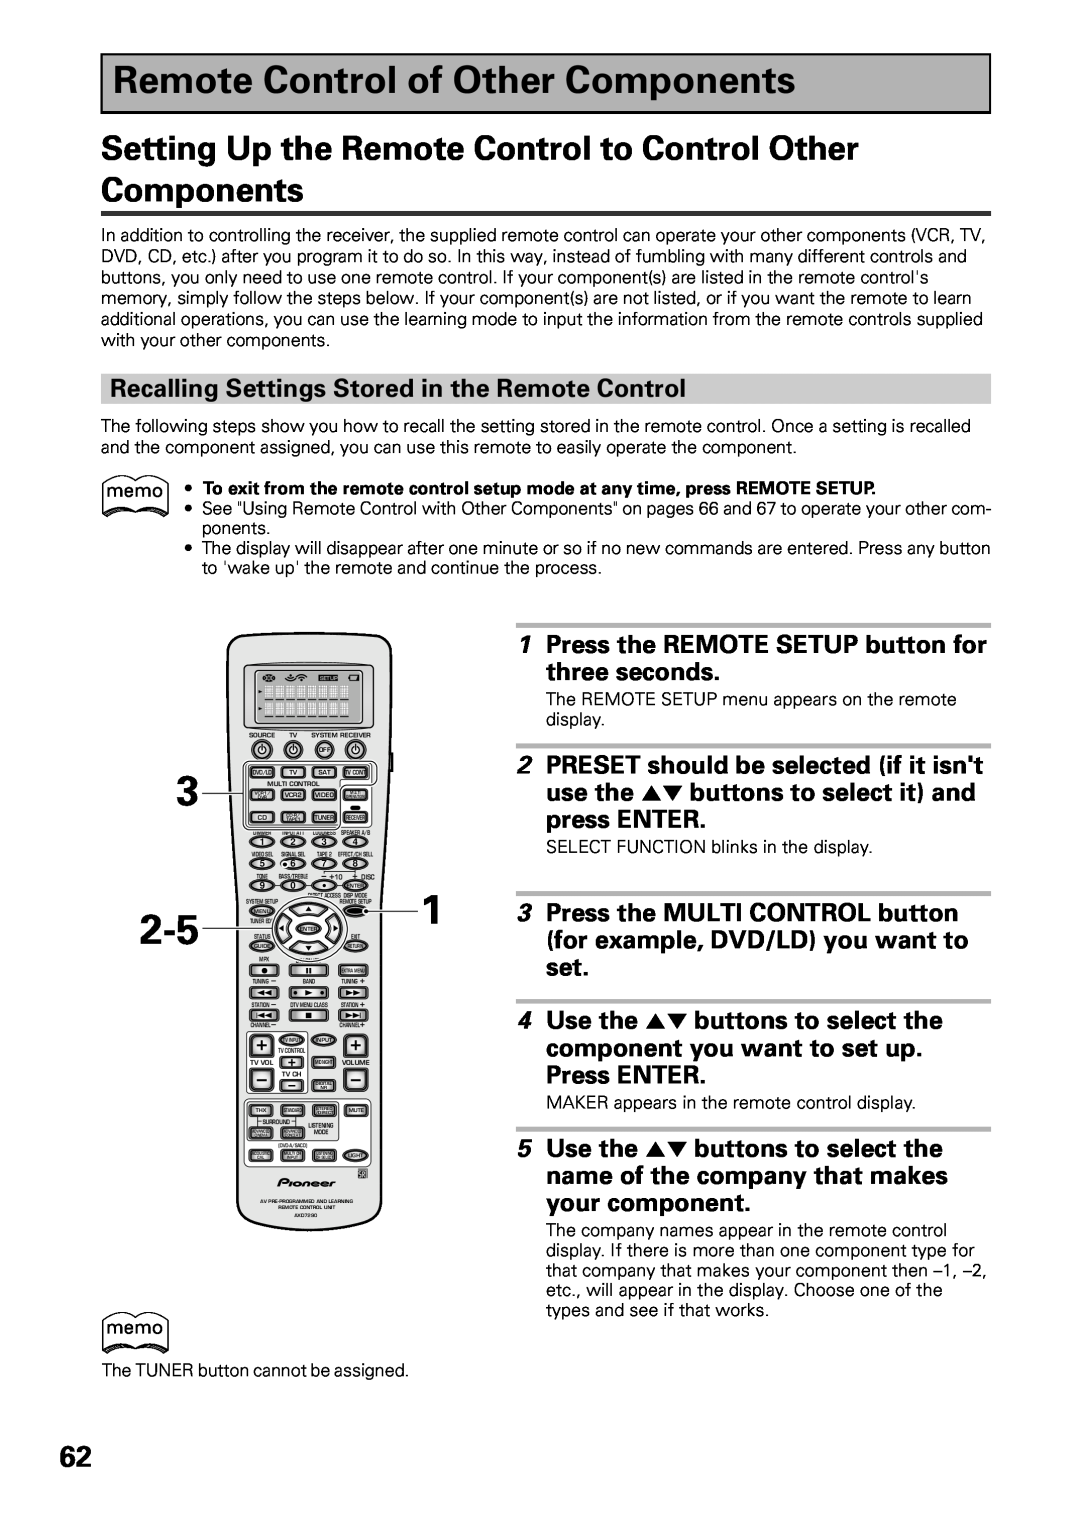 Pioneer VSX-47TX manual Remote Control of Other Components, Recalling Settings Stored in the Remote Control, Press ENTER 